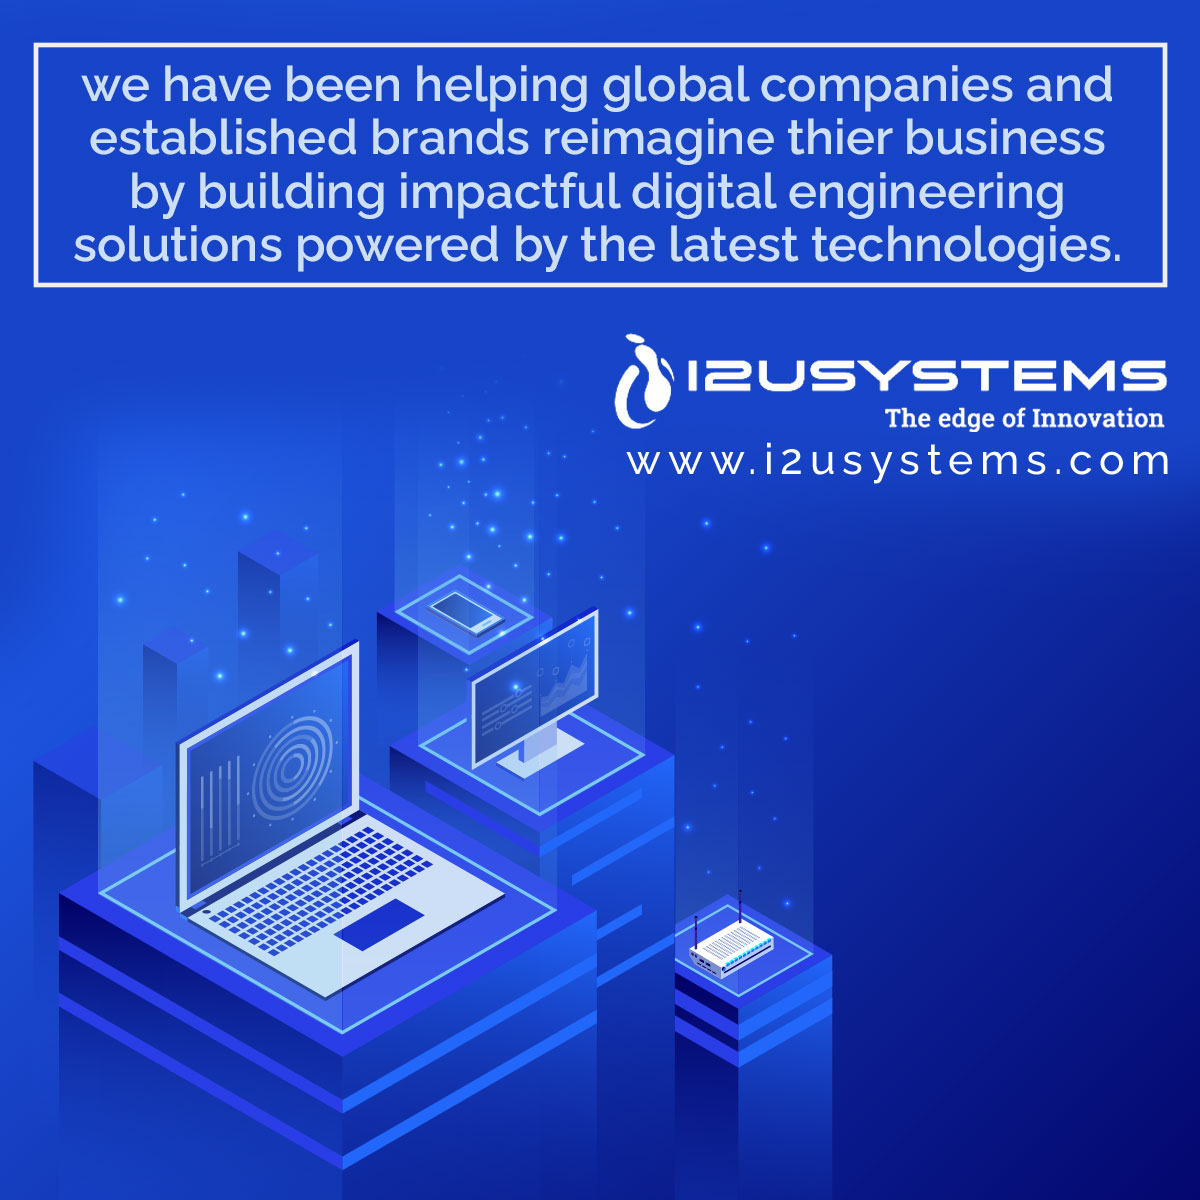 we have been helping global companies and established brands reimagine thier business by building impactful digital engineering solutions powered by the latest technologies. #i2usystems #c2crequirements #w2jobs #directclient #global #reimagine #solutions #technologies #brands